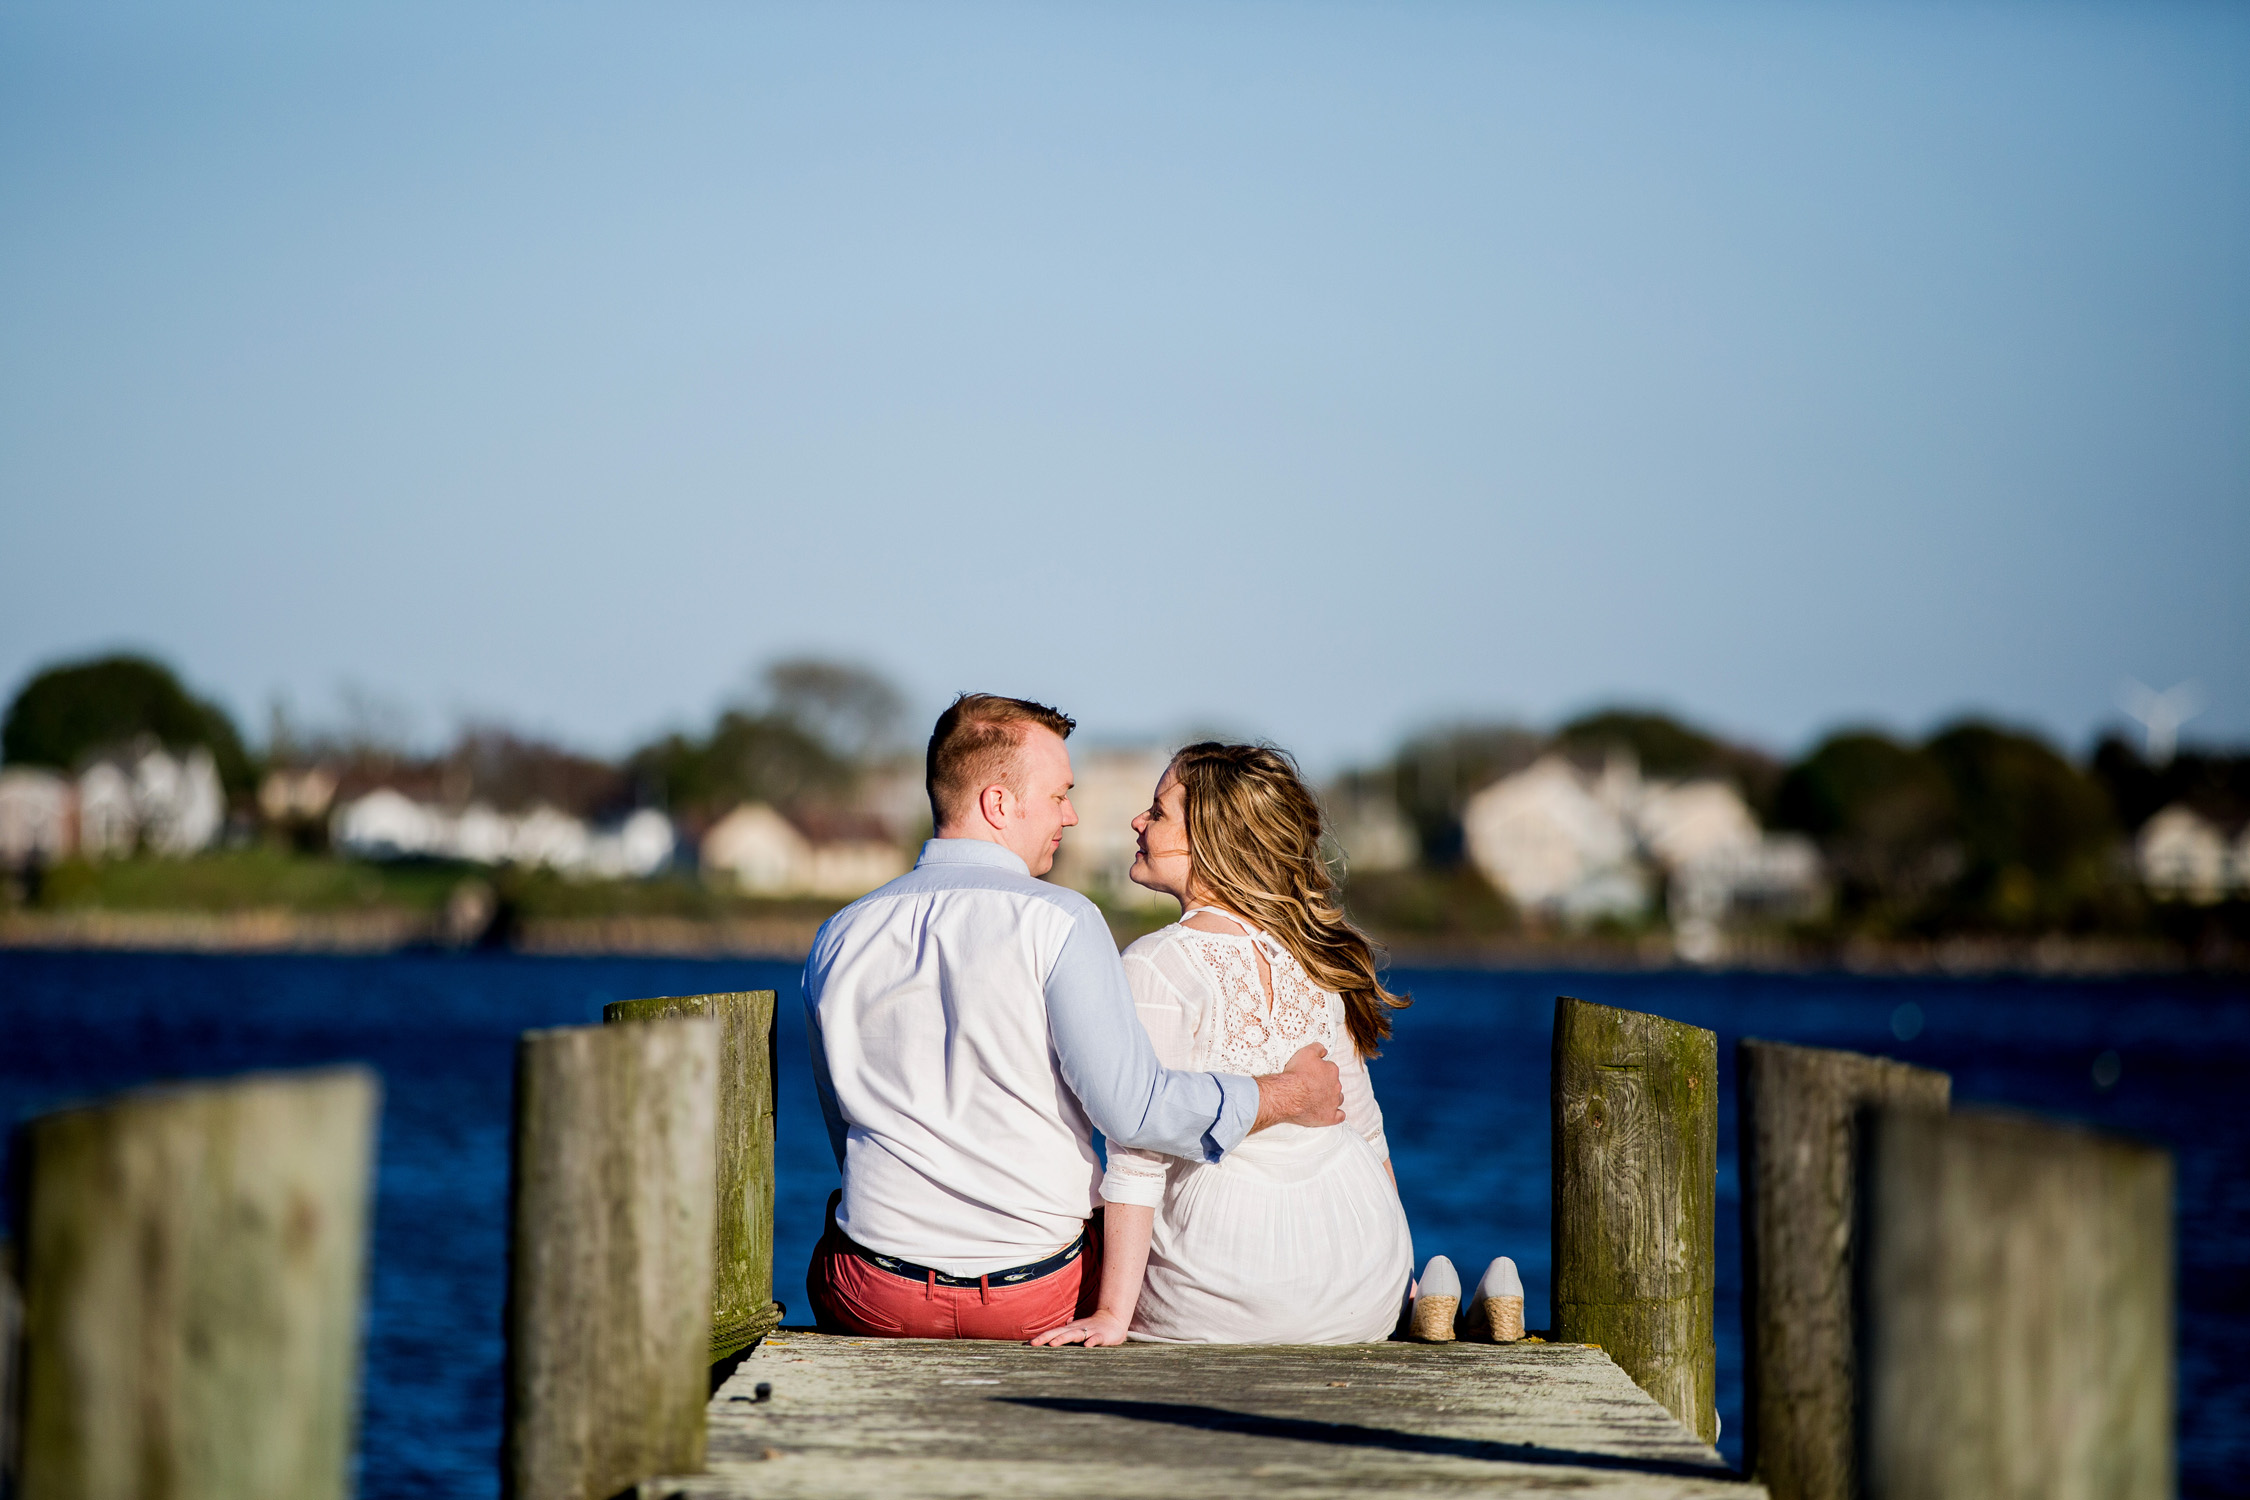 Tracey Buyce Engagement Photography45.jpg